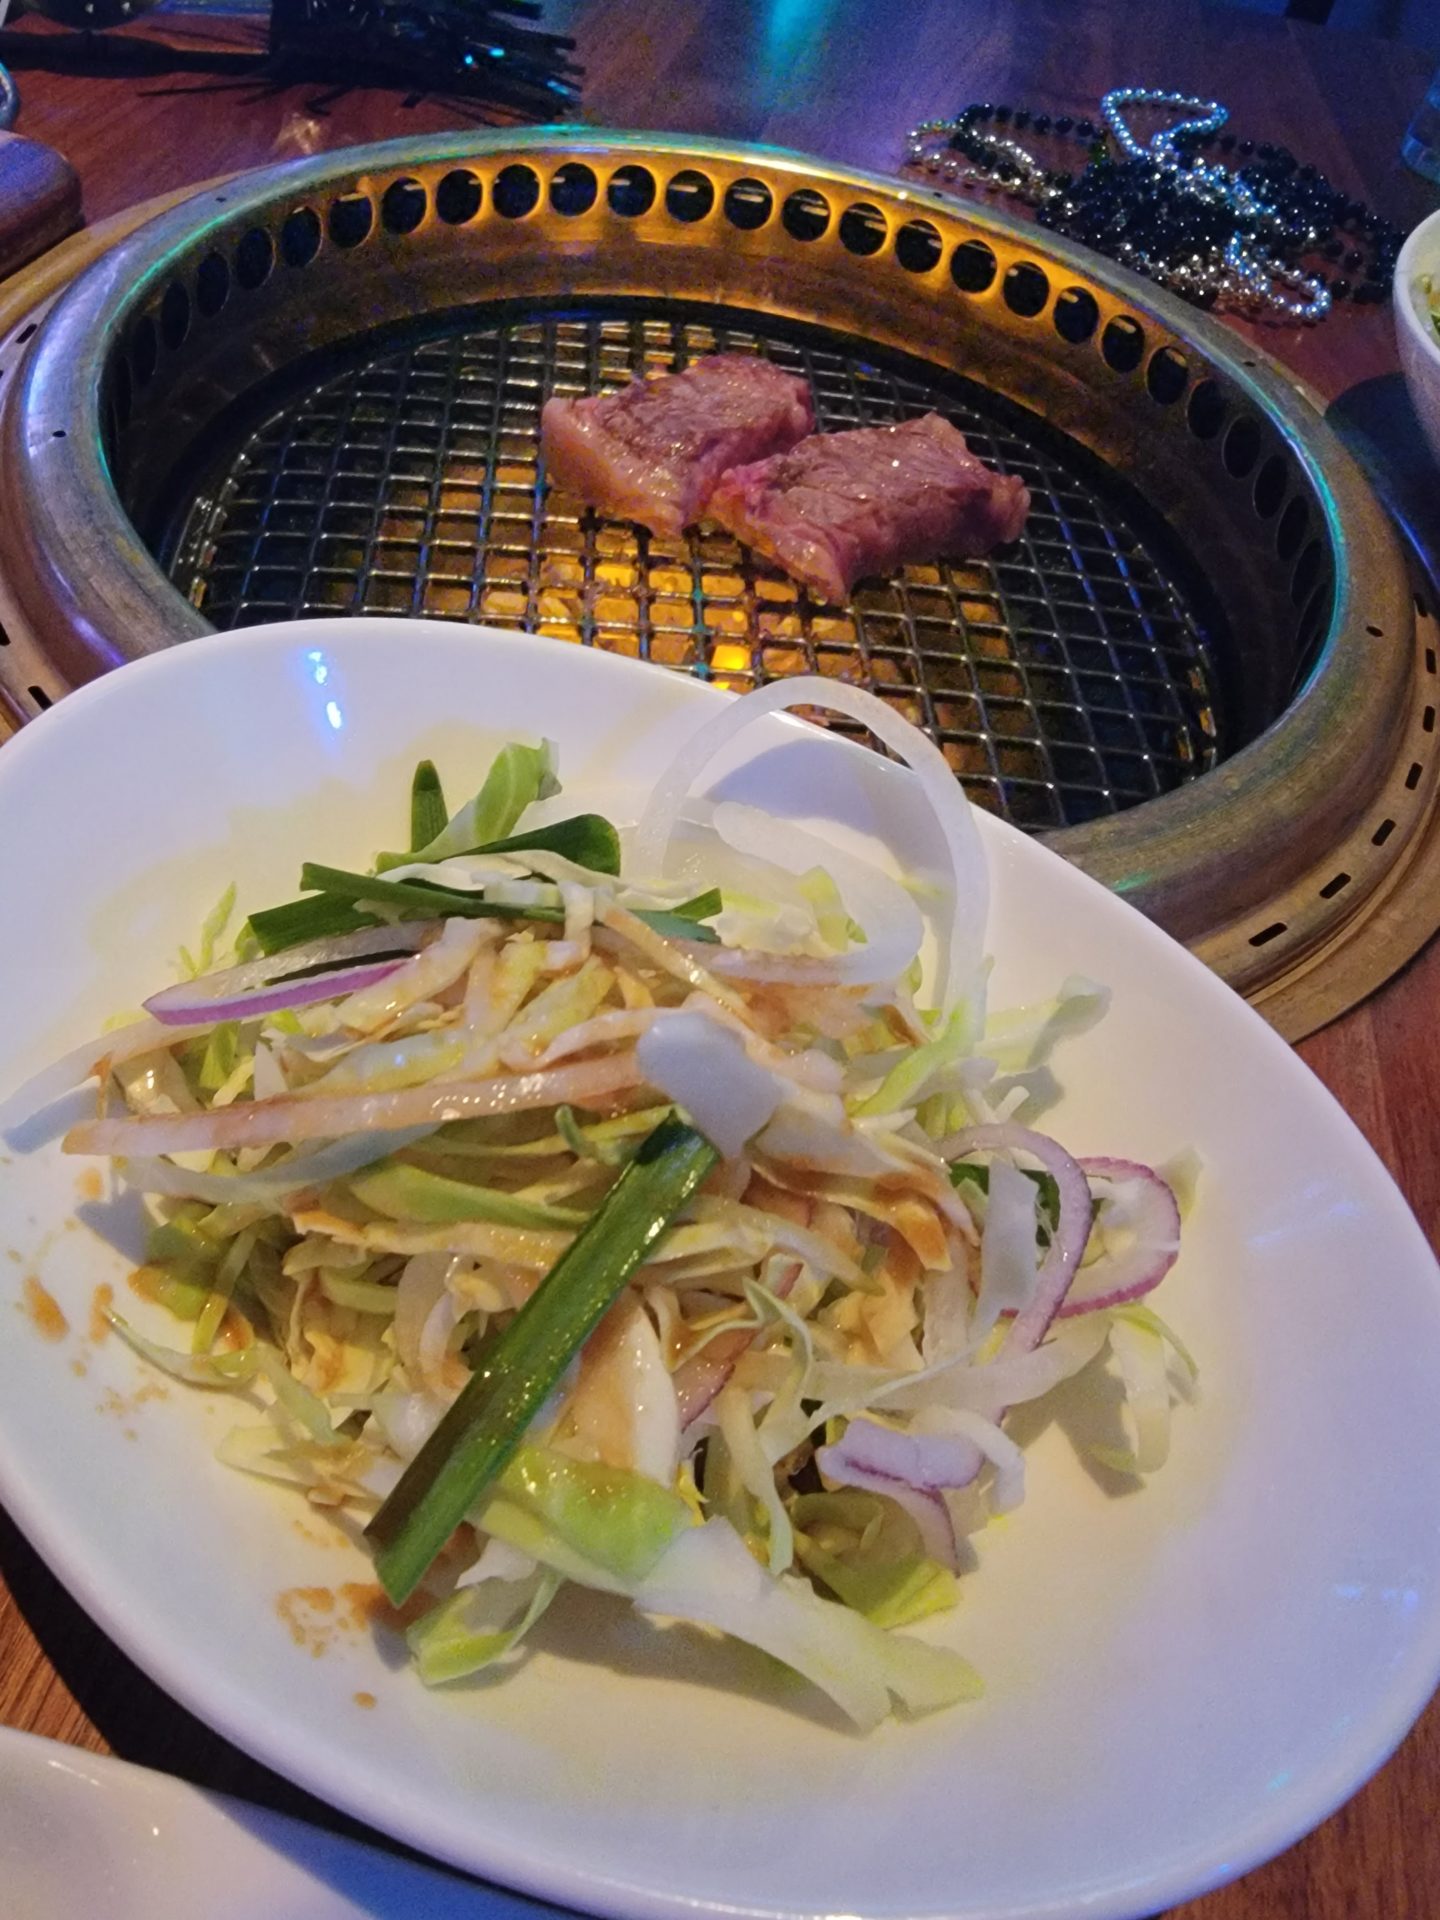 a plate of food on a grill